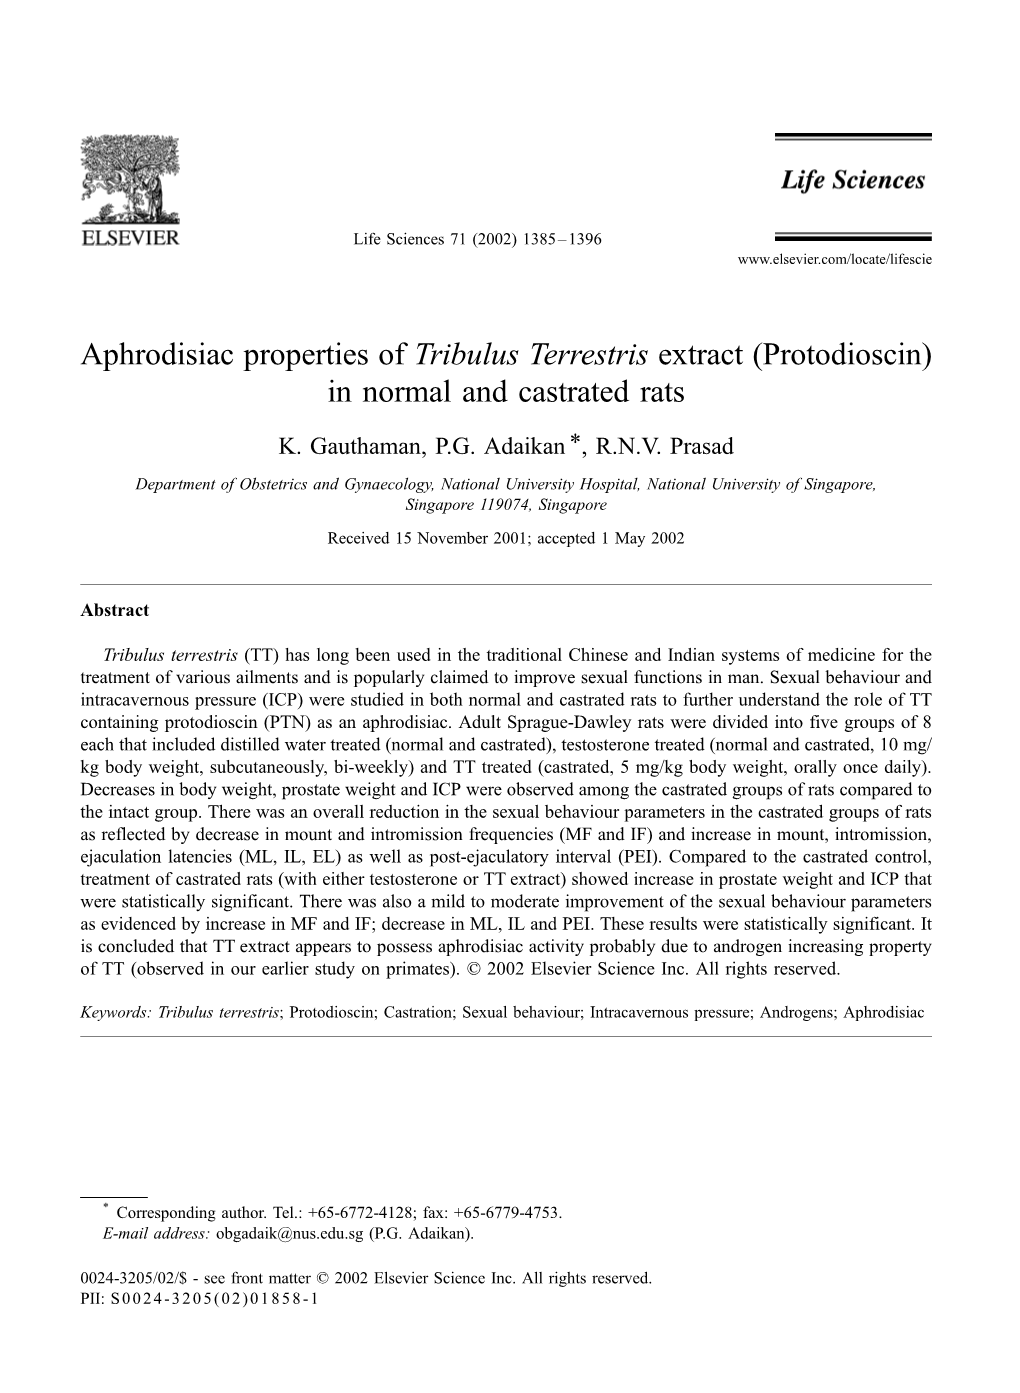 Aphrodisiac Properties of Tribulus Terrestris Extract (Protodioscin) in Normal and Castrated Rats